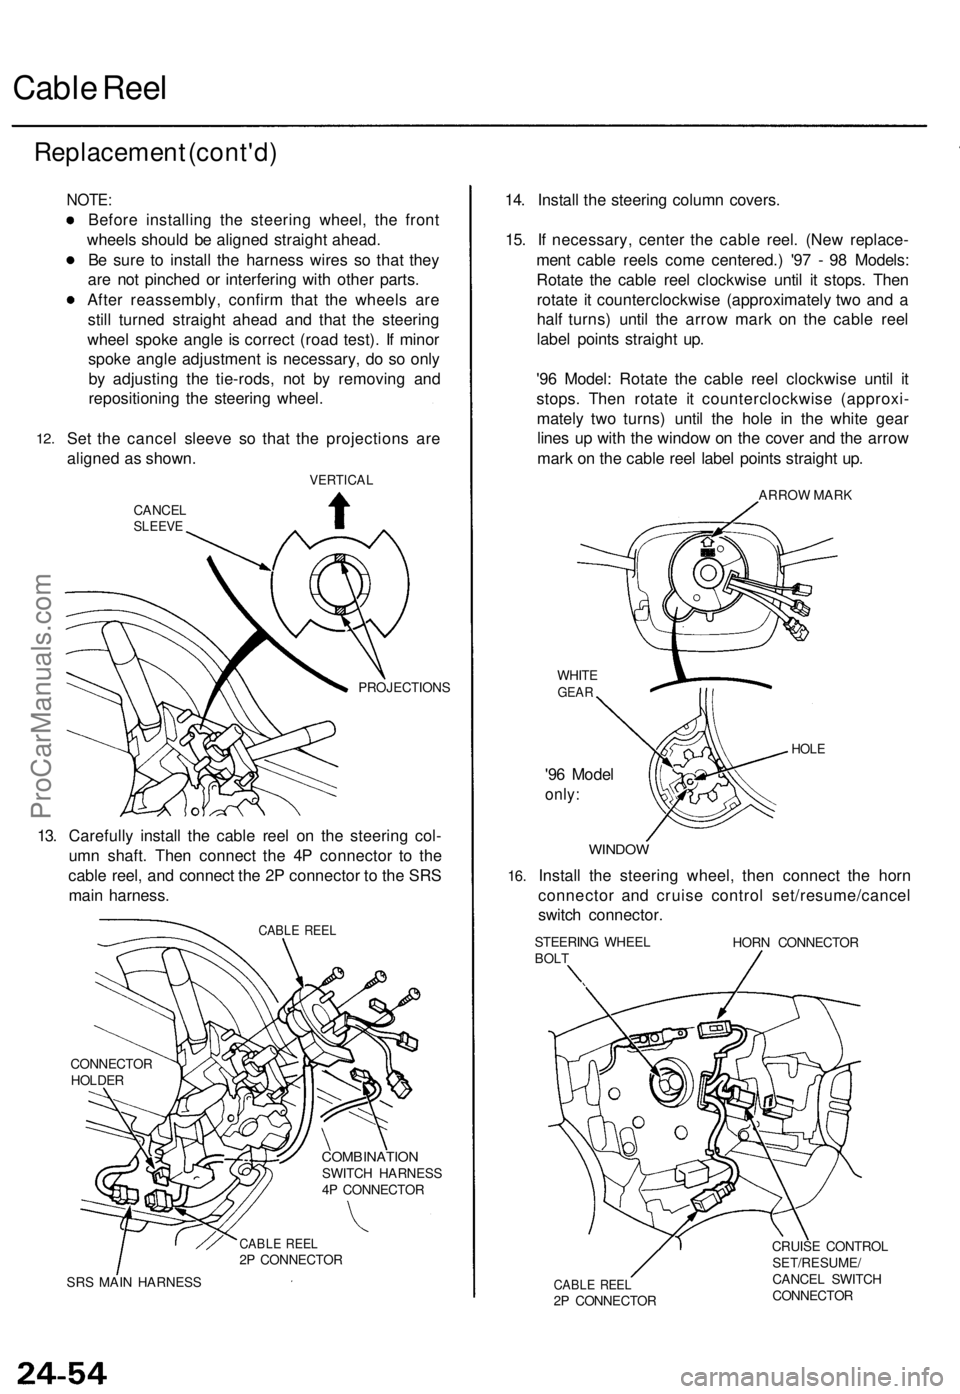 ACURA TL 1995  Service Repair Manual 
Cable Reel

Replacement (cont'd)

12. 
NOTE:

Before installing the steering wheel, the front

wheels should be aligned straight ahead.

Be sure to install the harness wires so that they

are not